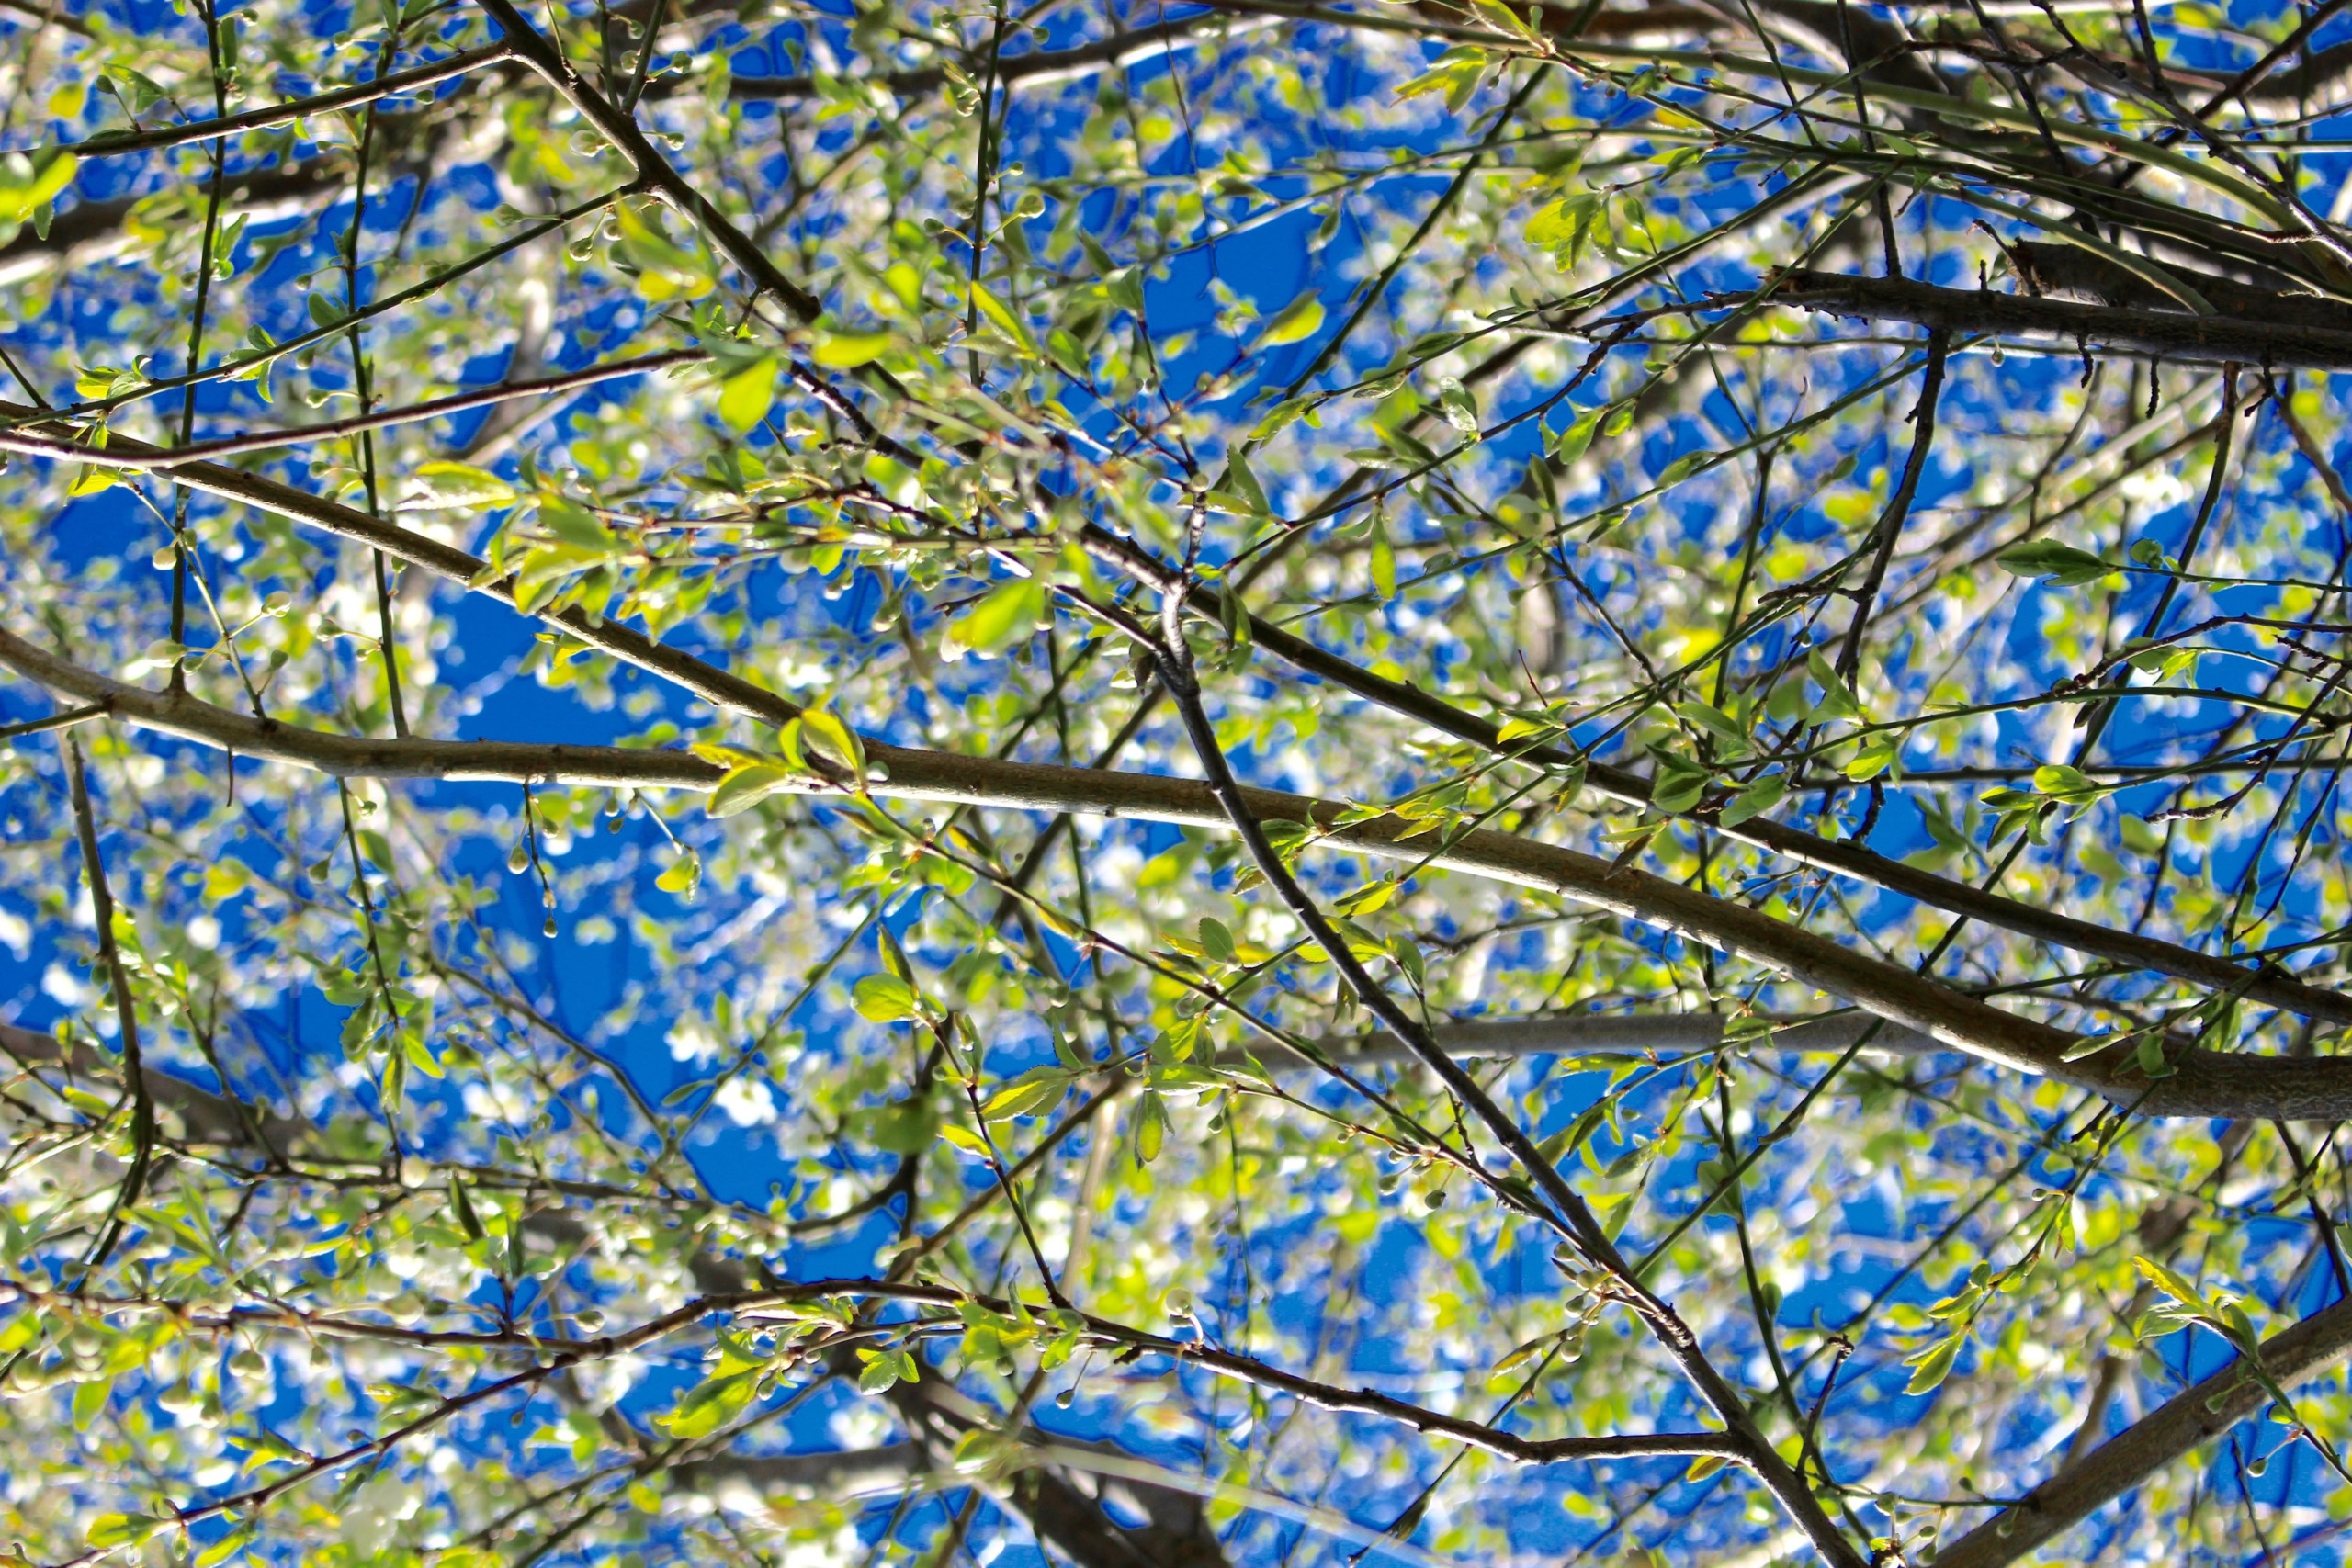 Tree branches with small green leaves in sunny daylight with blue sky in the background.